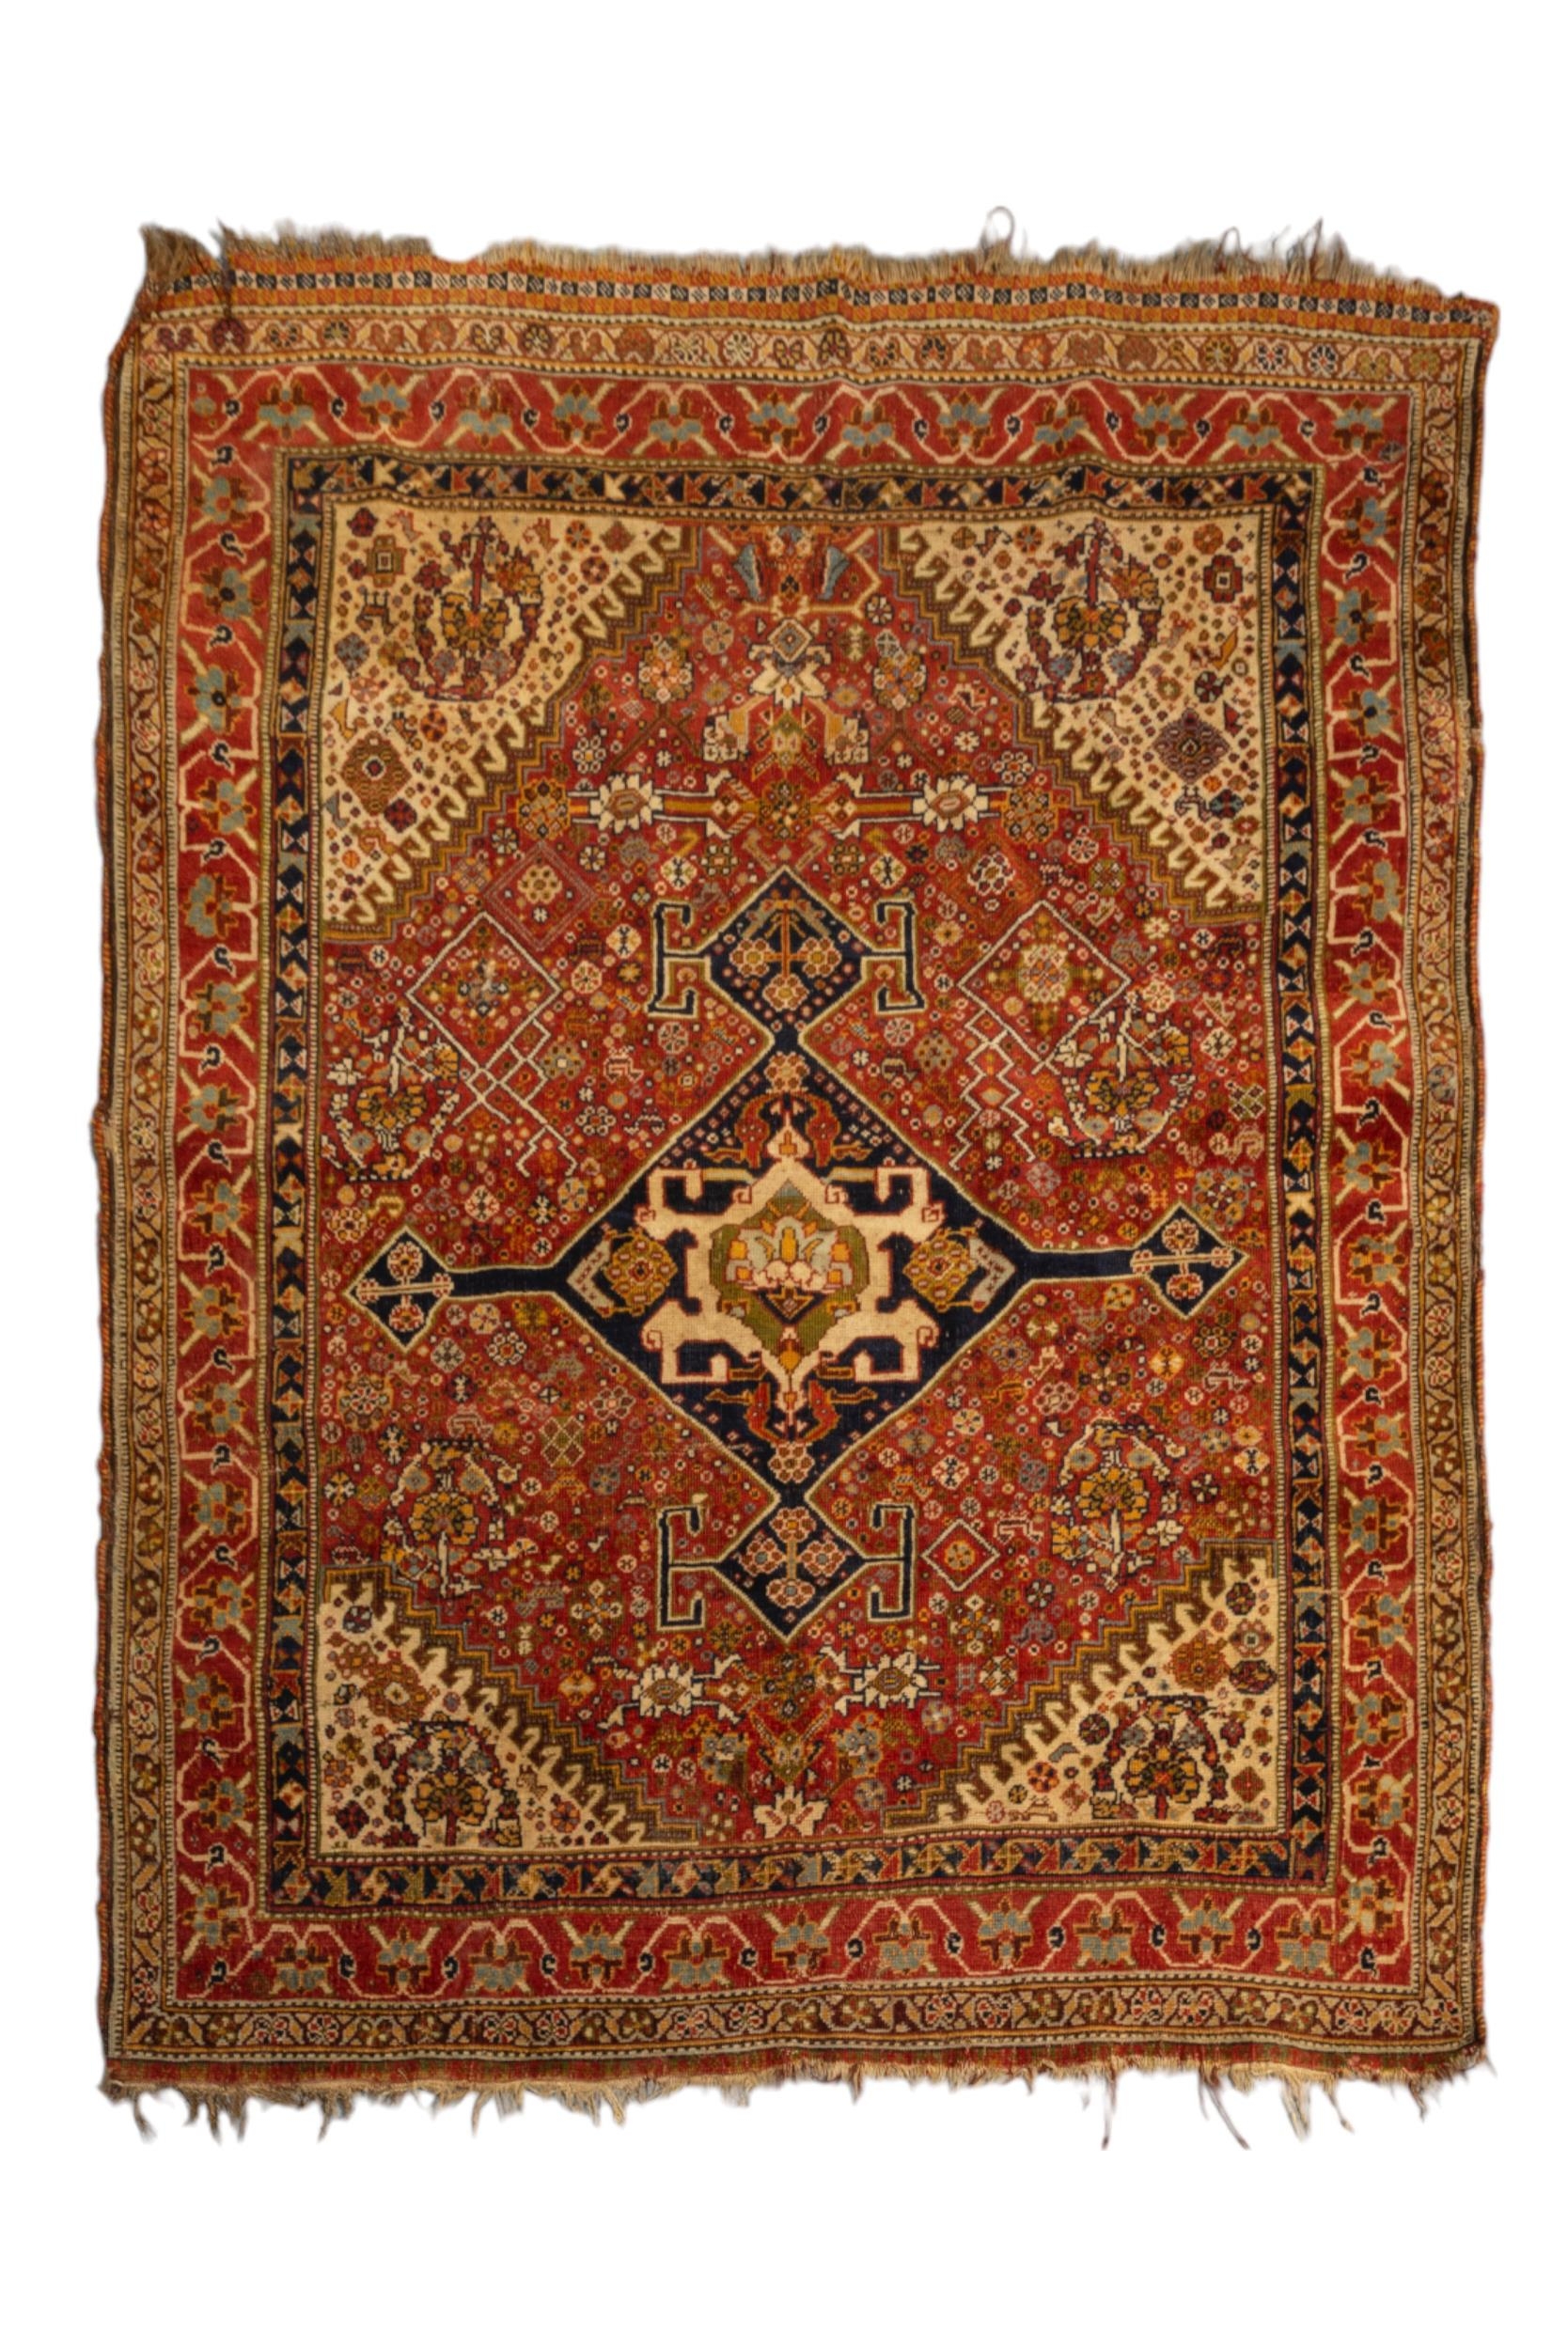 A HAND KNOTTED PERSIAN WOOL RUG, LATE 19TH / EARLY 20TH CENTURY, probably Shiraz (A.F) 157 x 121 cm